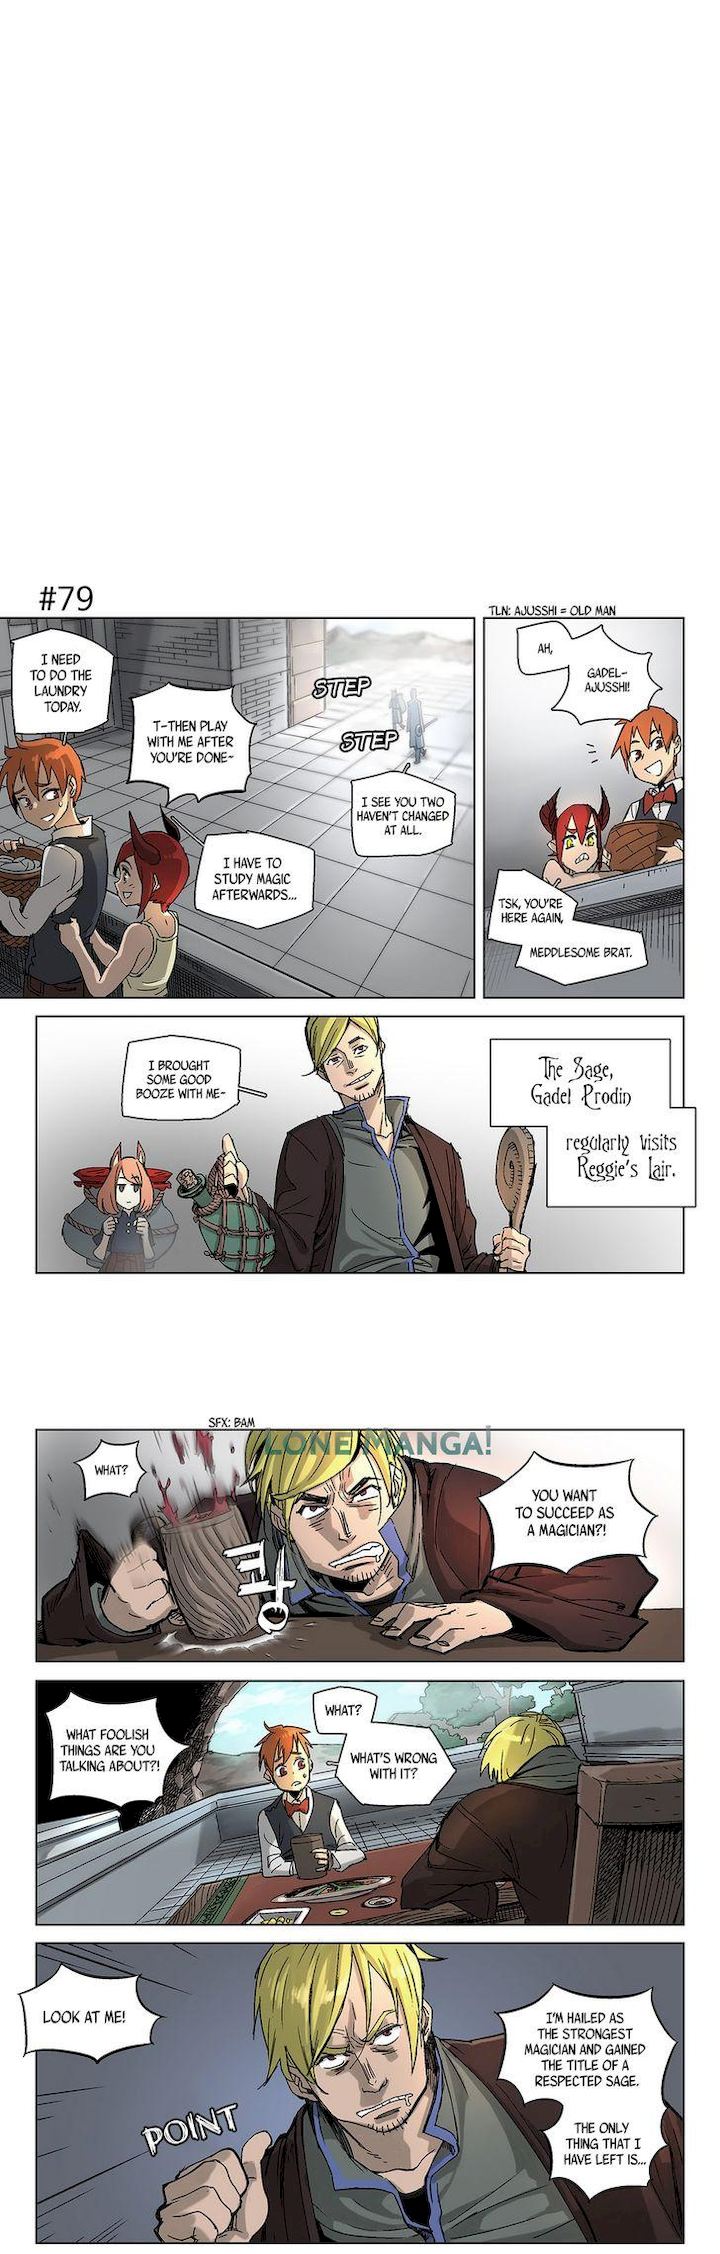 4 Cut Hero - Chapter 13 Page 2